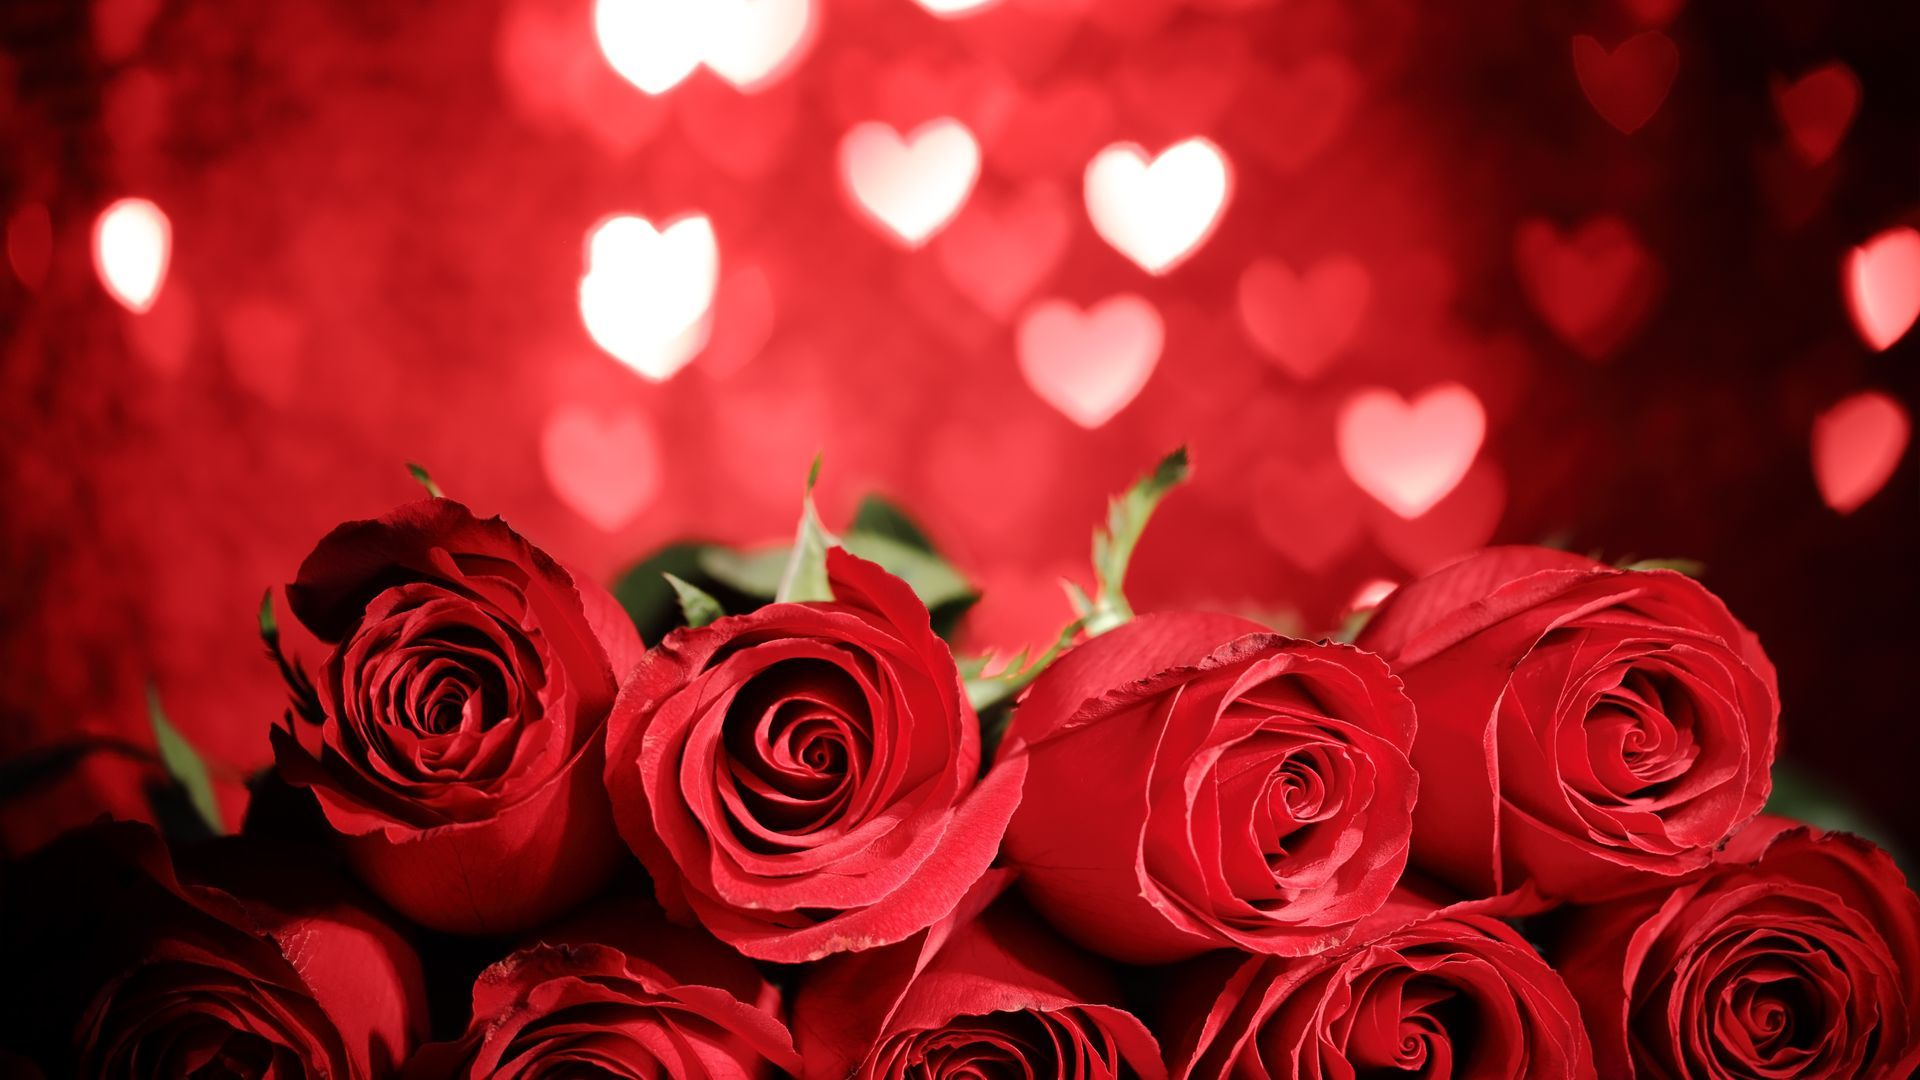 1920x1080 Red Rose With Hearts Free Download Image | Rose rosse, Giorno di san valentino, Bouquet di rose rosse